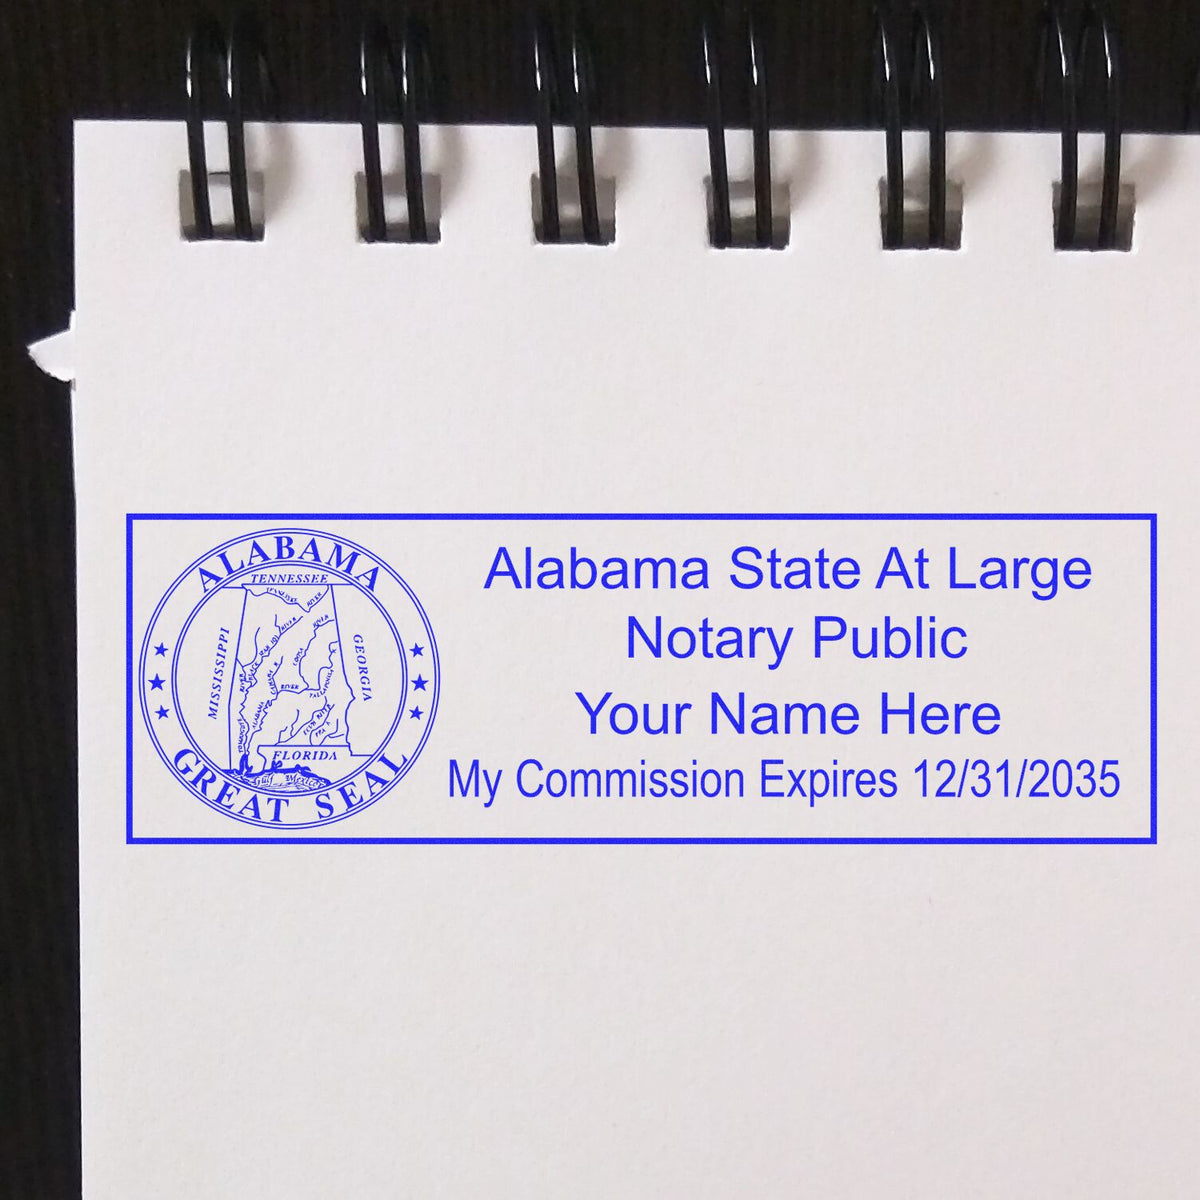 This paper is stamped with a sample imprint of the Slim Pre-Inked State Seal Notary Stamp for Alabama, signifying its quality and reliability.